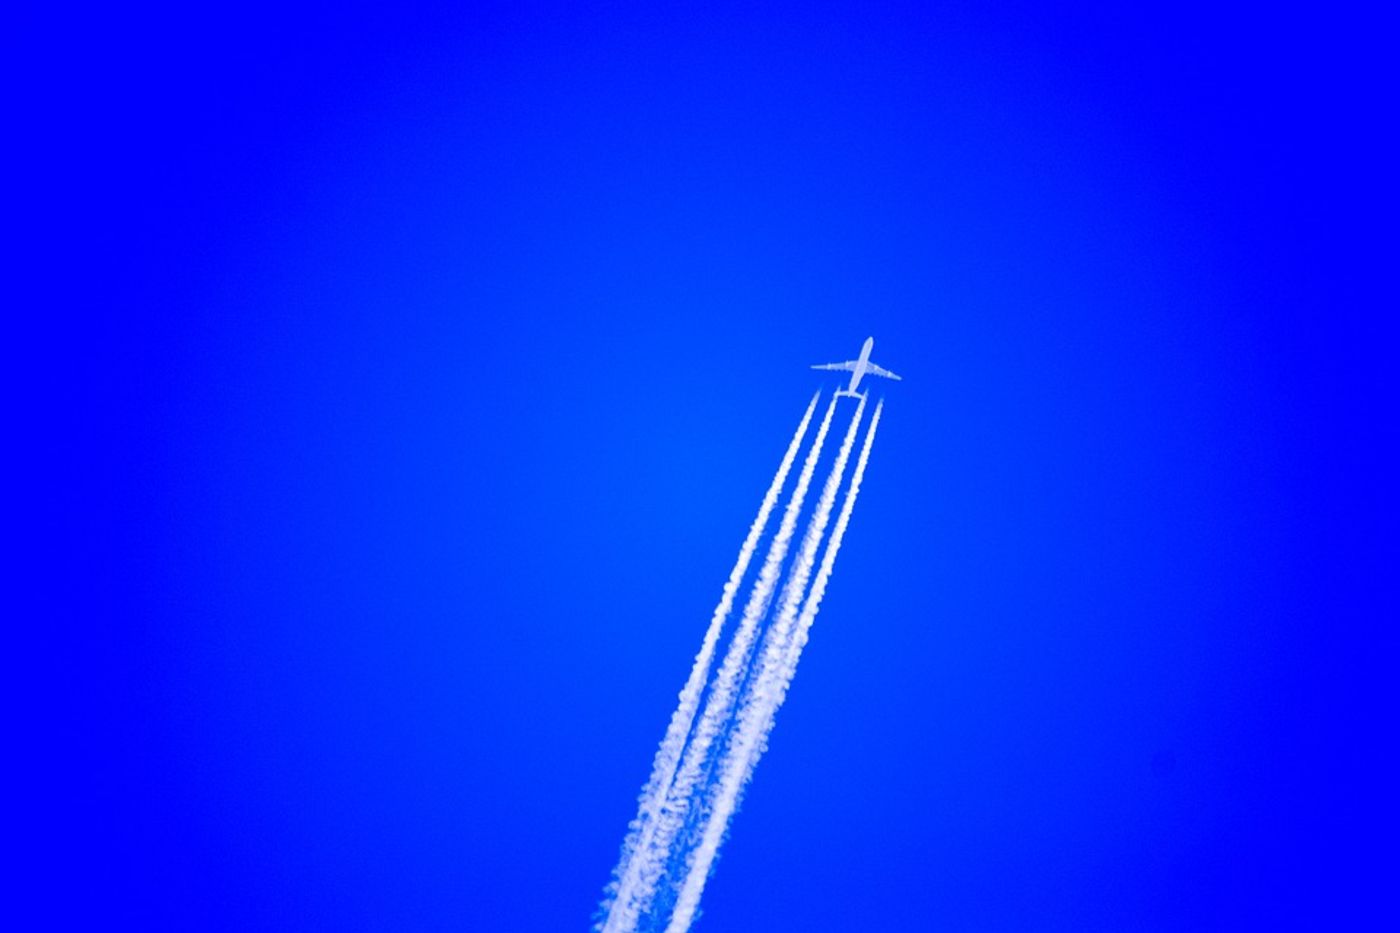 New research suggests a way to reduce the negative climate impact from contrails. Photo: Pixabay